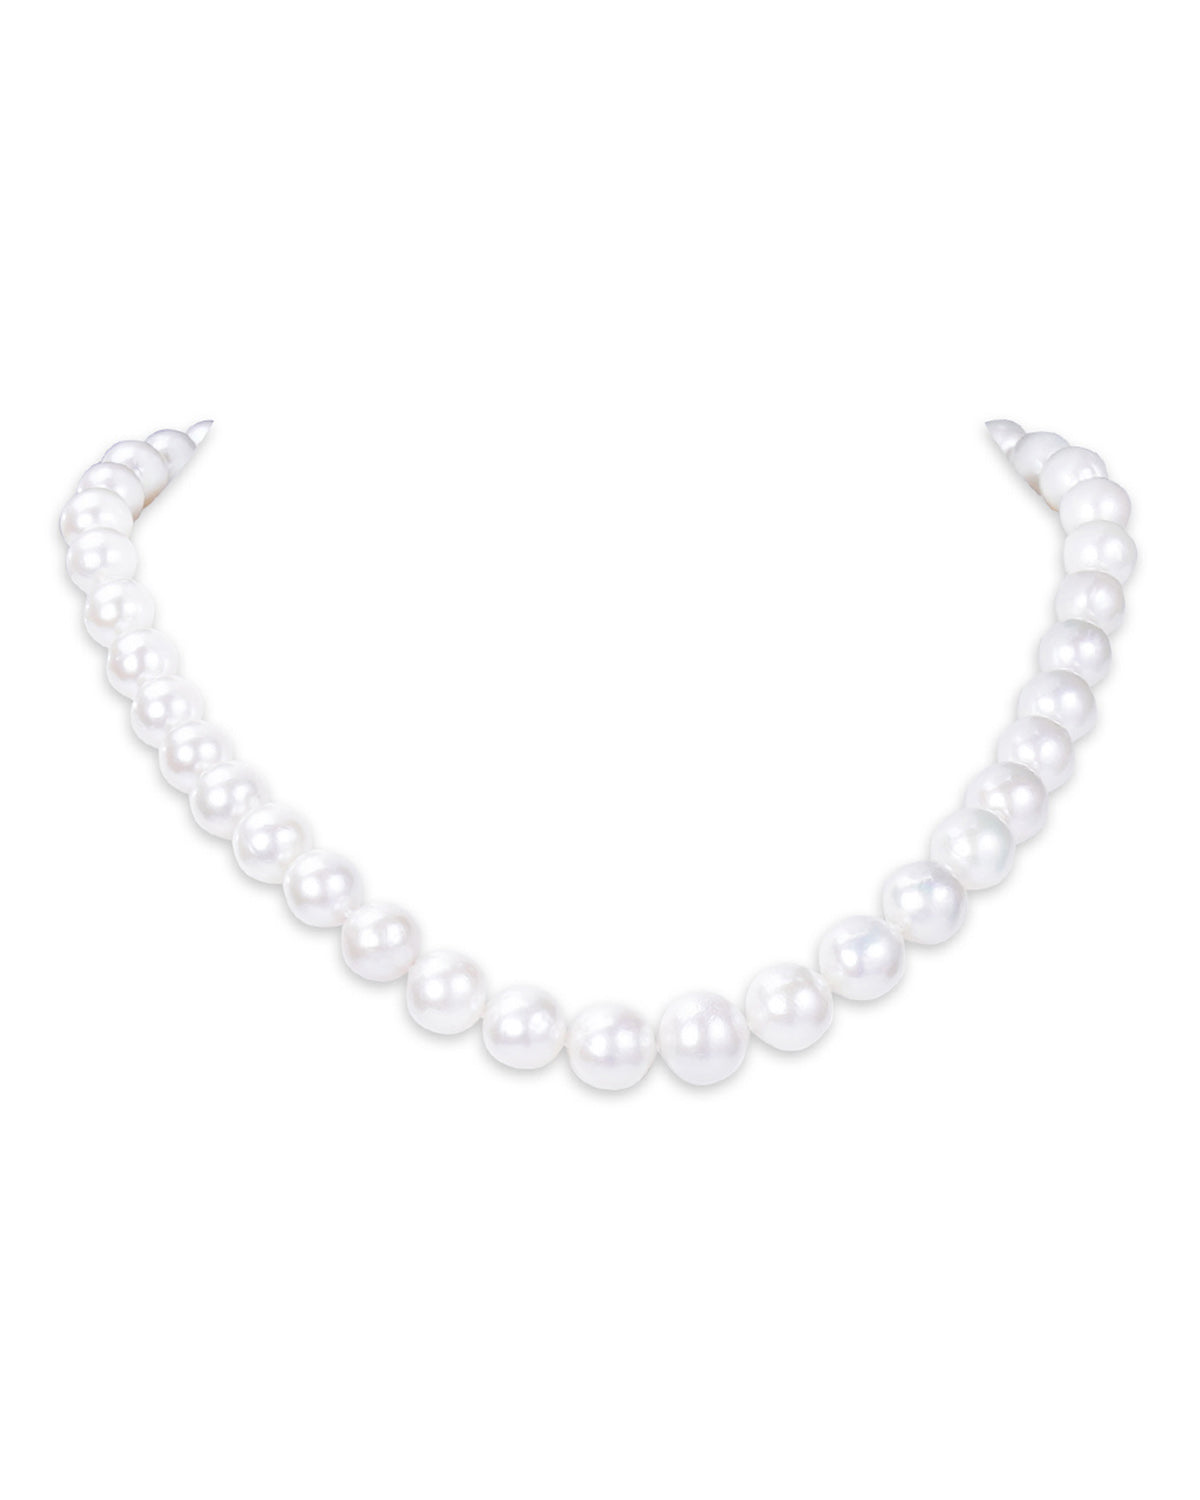 9-12mm Big Light Bulb Freshwater White Pearl Gradient Necklace